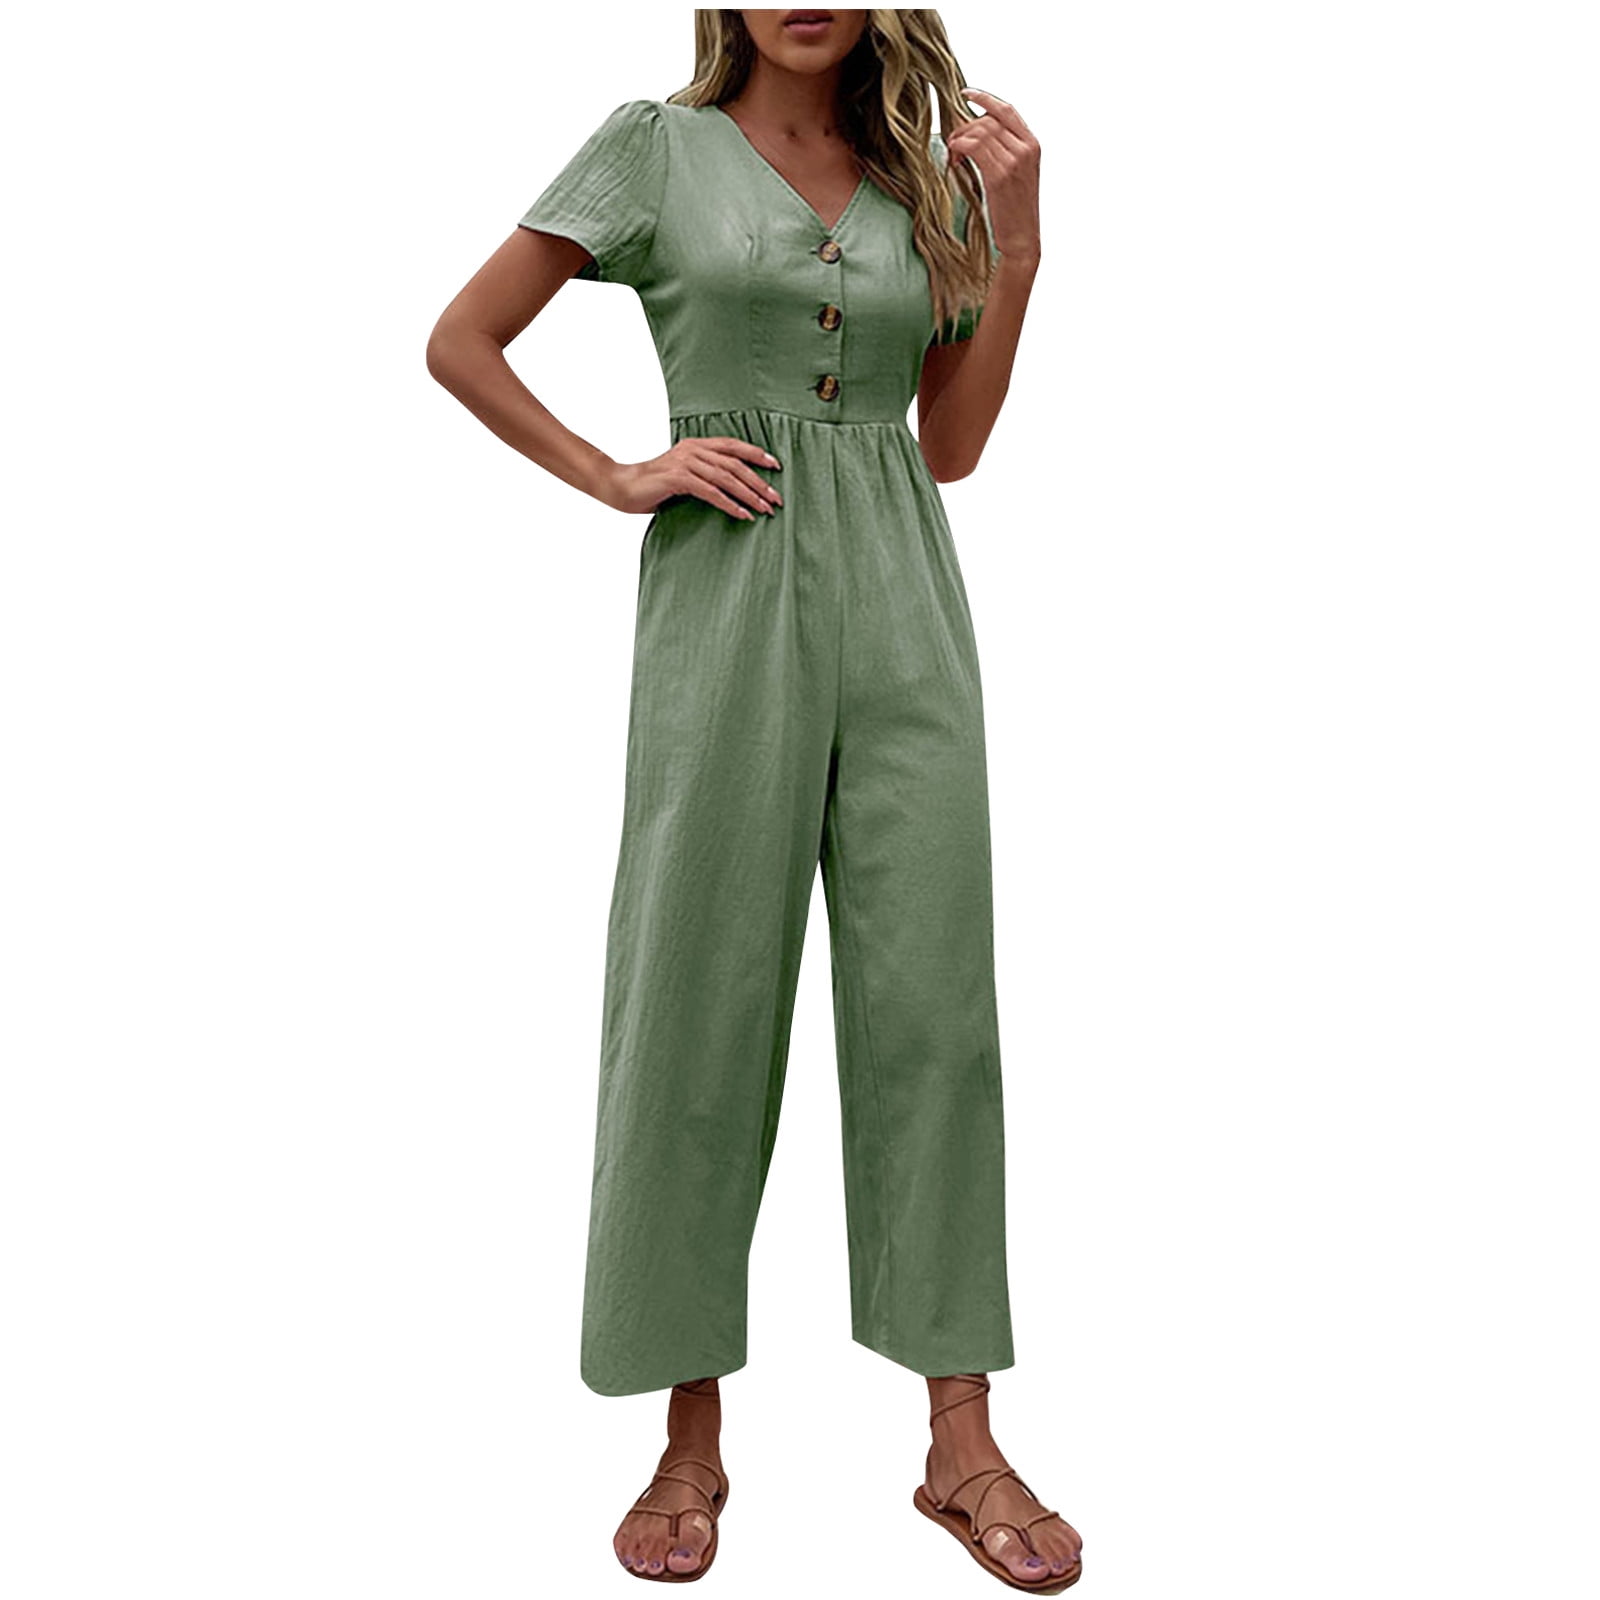 Womens Summer Spaghetti Strap Wide Leg Split Jumpsuits Long Clearance Sale Fashion Summer Casual Sexy Short Sleeve Solid Color Pants Jumpsuits - Walmart.com